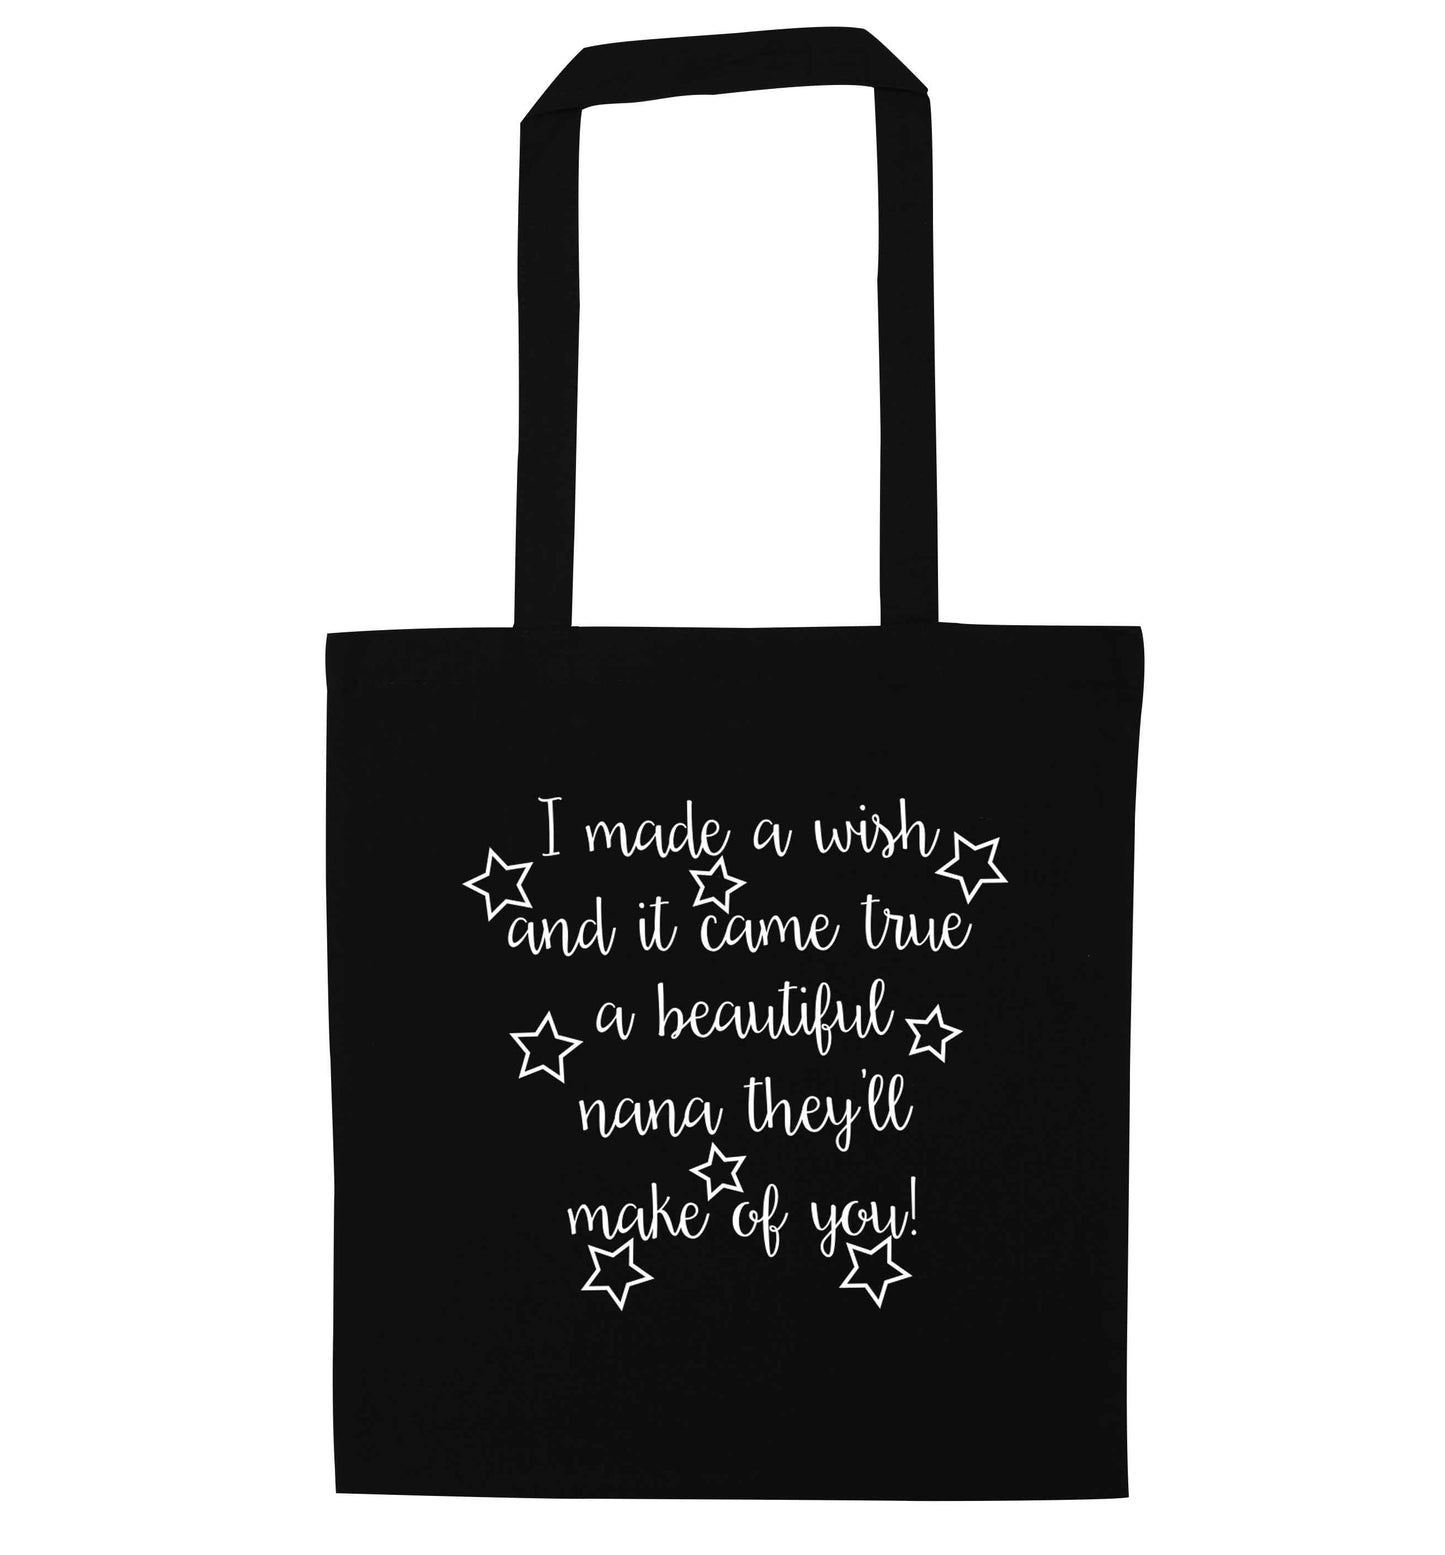 I made a wish and it came true a beautiful nana they'll make of you! black tote bag